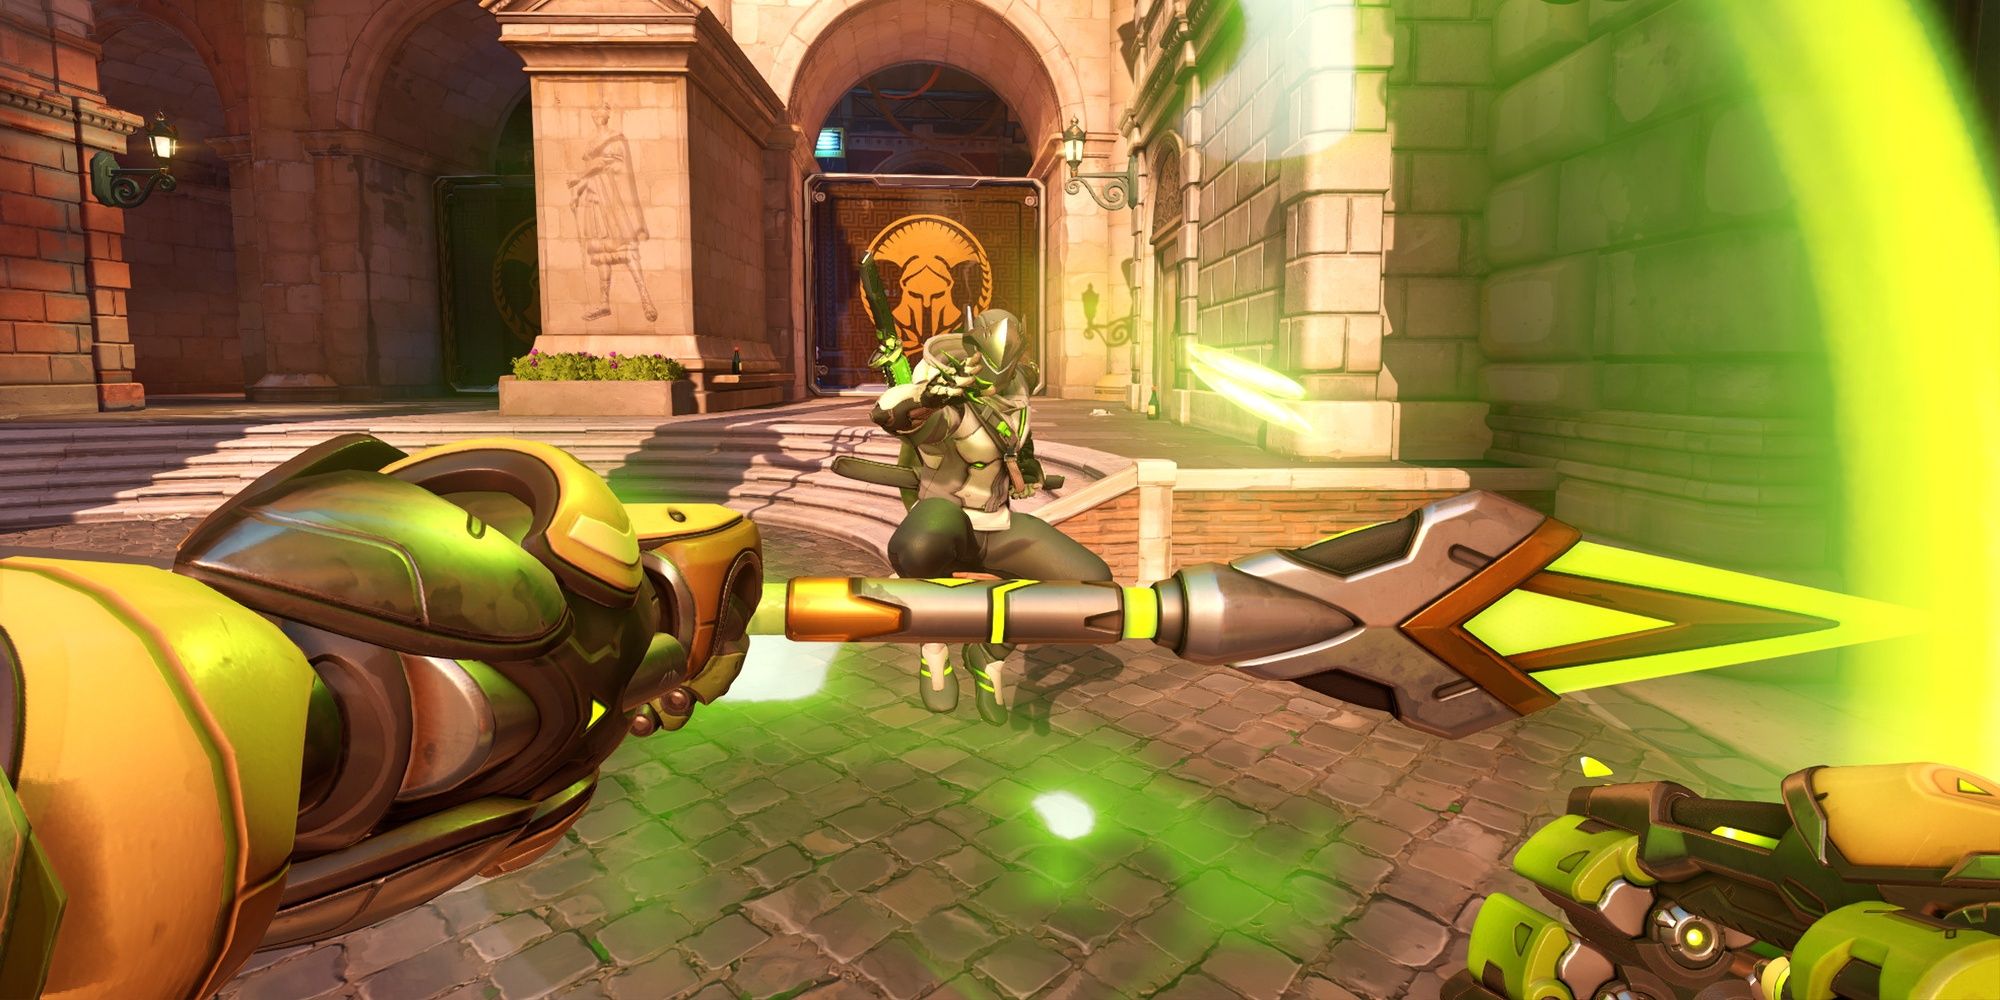 First person view of Orisa using her Spear Spin ability to block Genji's attacks in Overwatch 2.